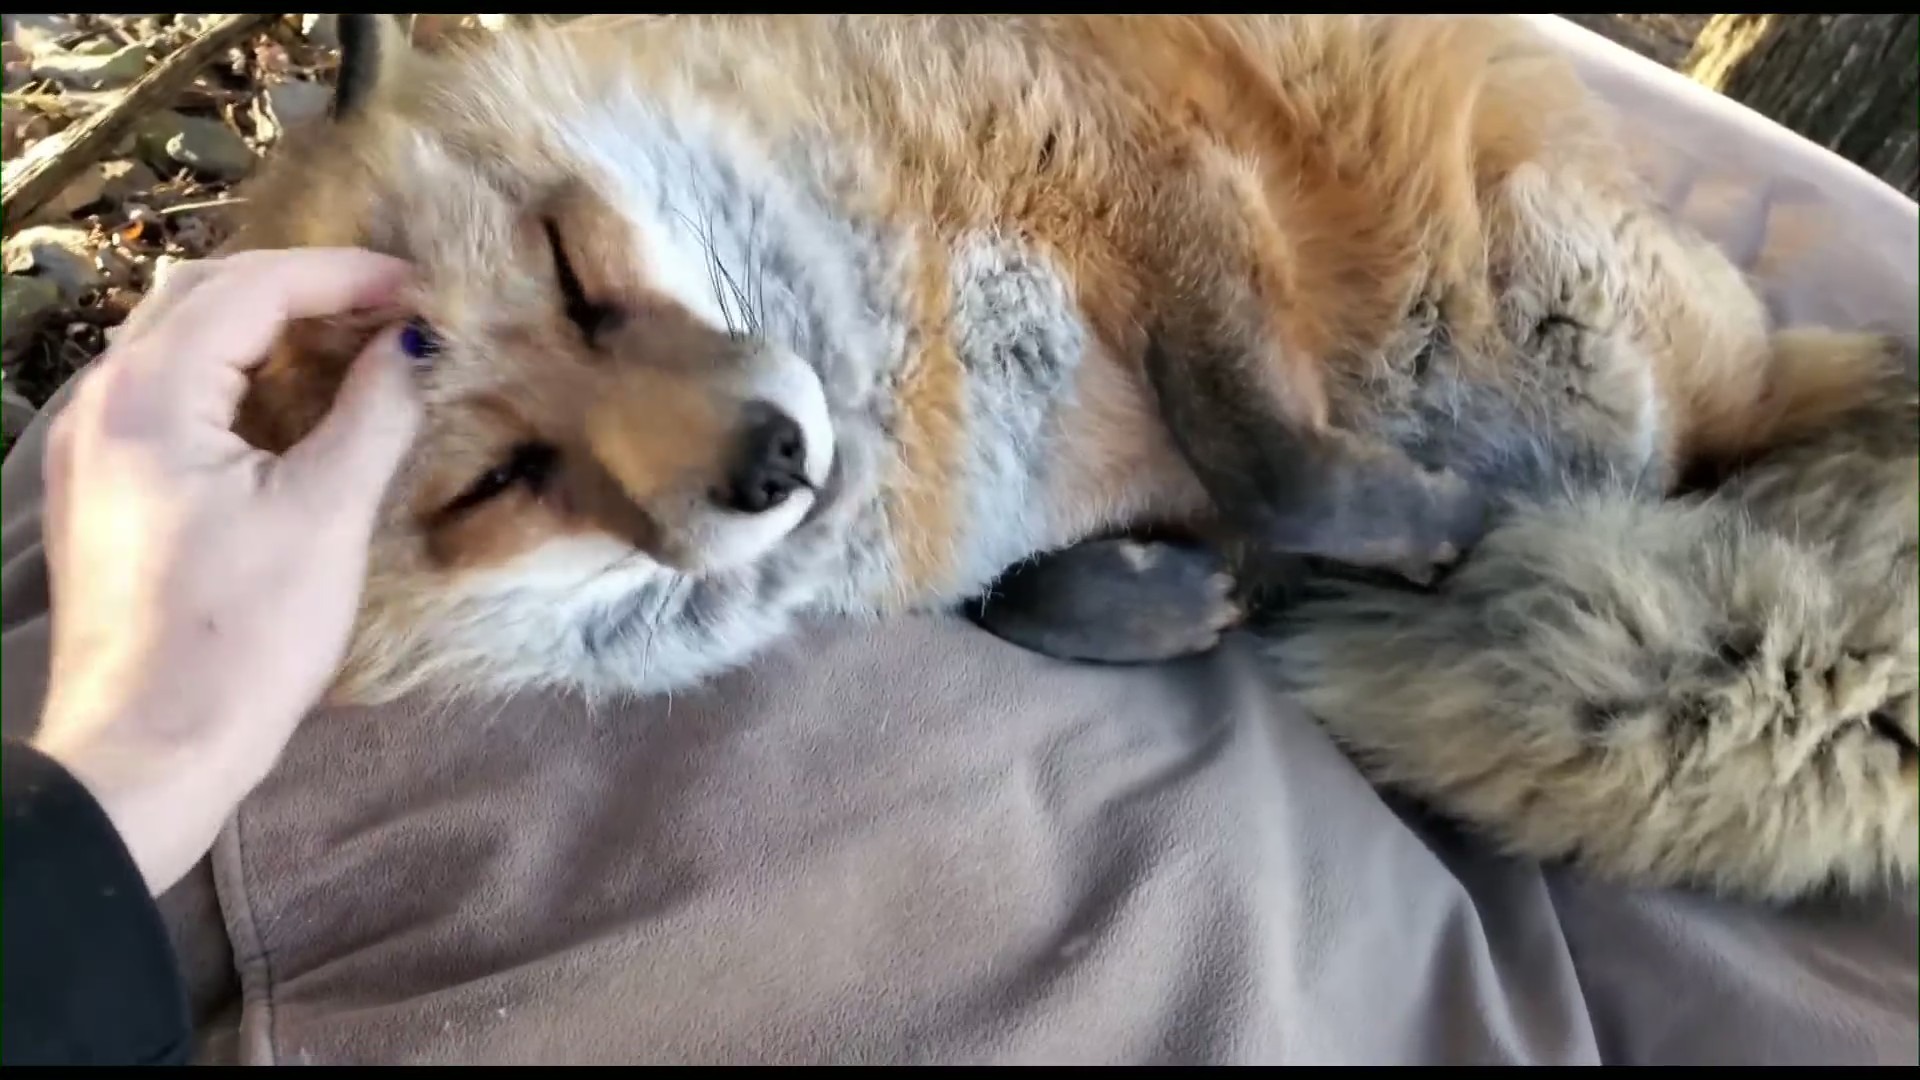 Minnesota Fox Rescue Group Gets National Attention After Viral Video